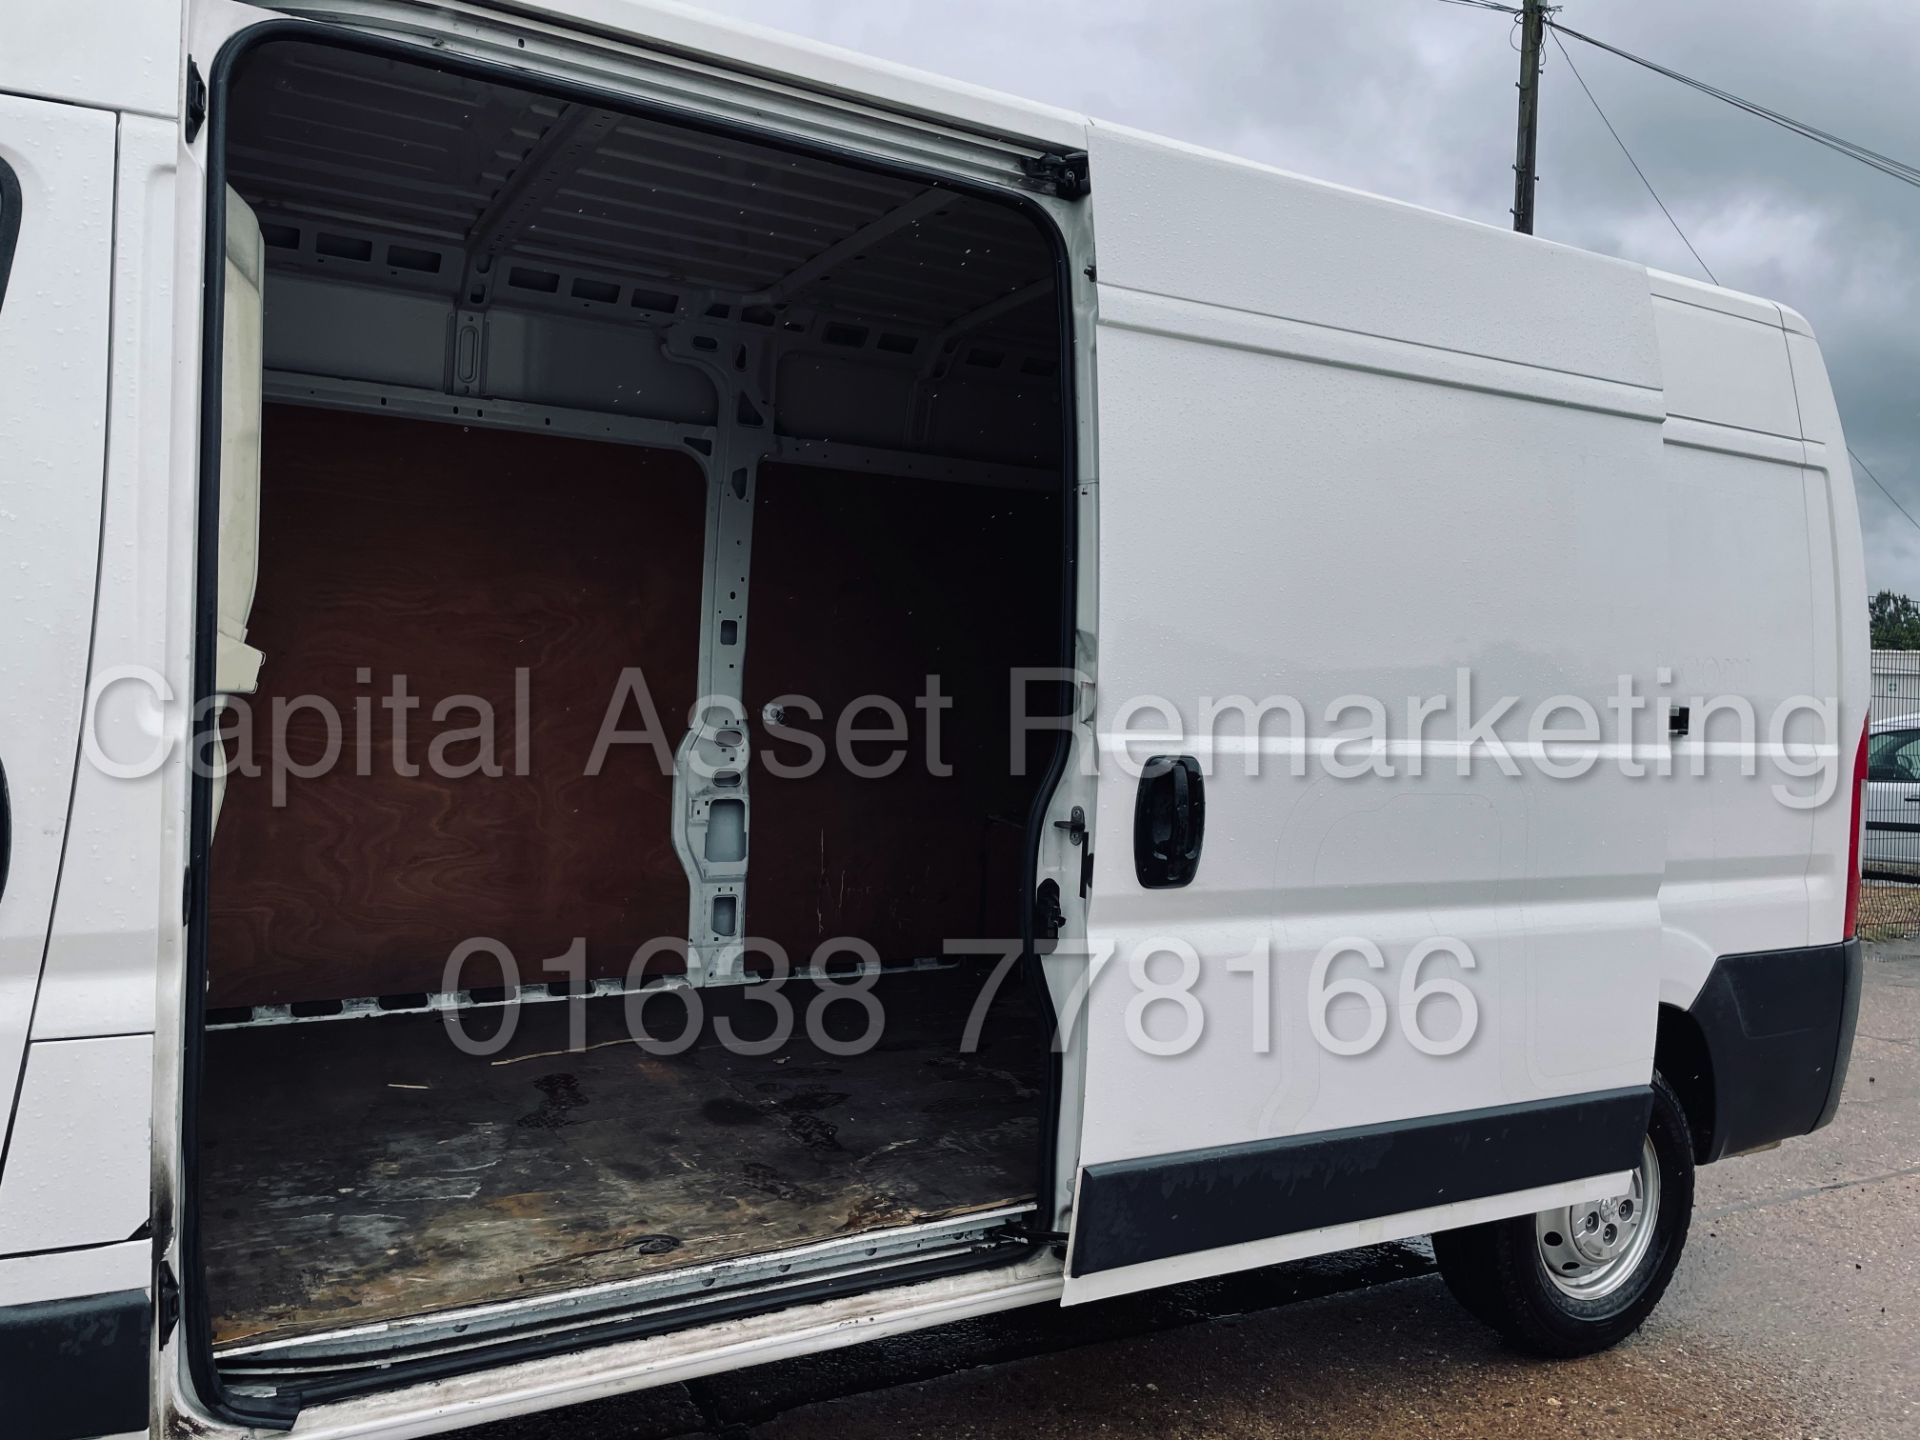 (On Sale) PEUGEOT BOXER 335 *PROFESSIONAL* LWB HI-ROOF (2016) '2.2 HDI - 6 SPEED' *A/C* (1 OWNER) - Image 22 of 41